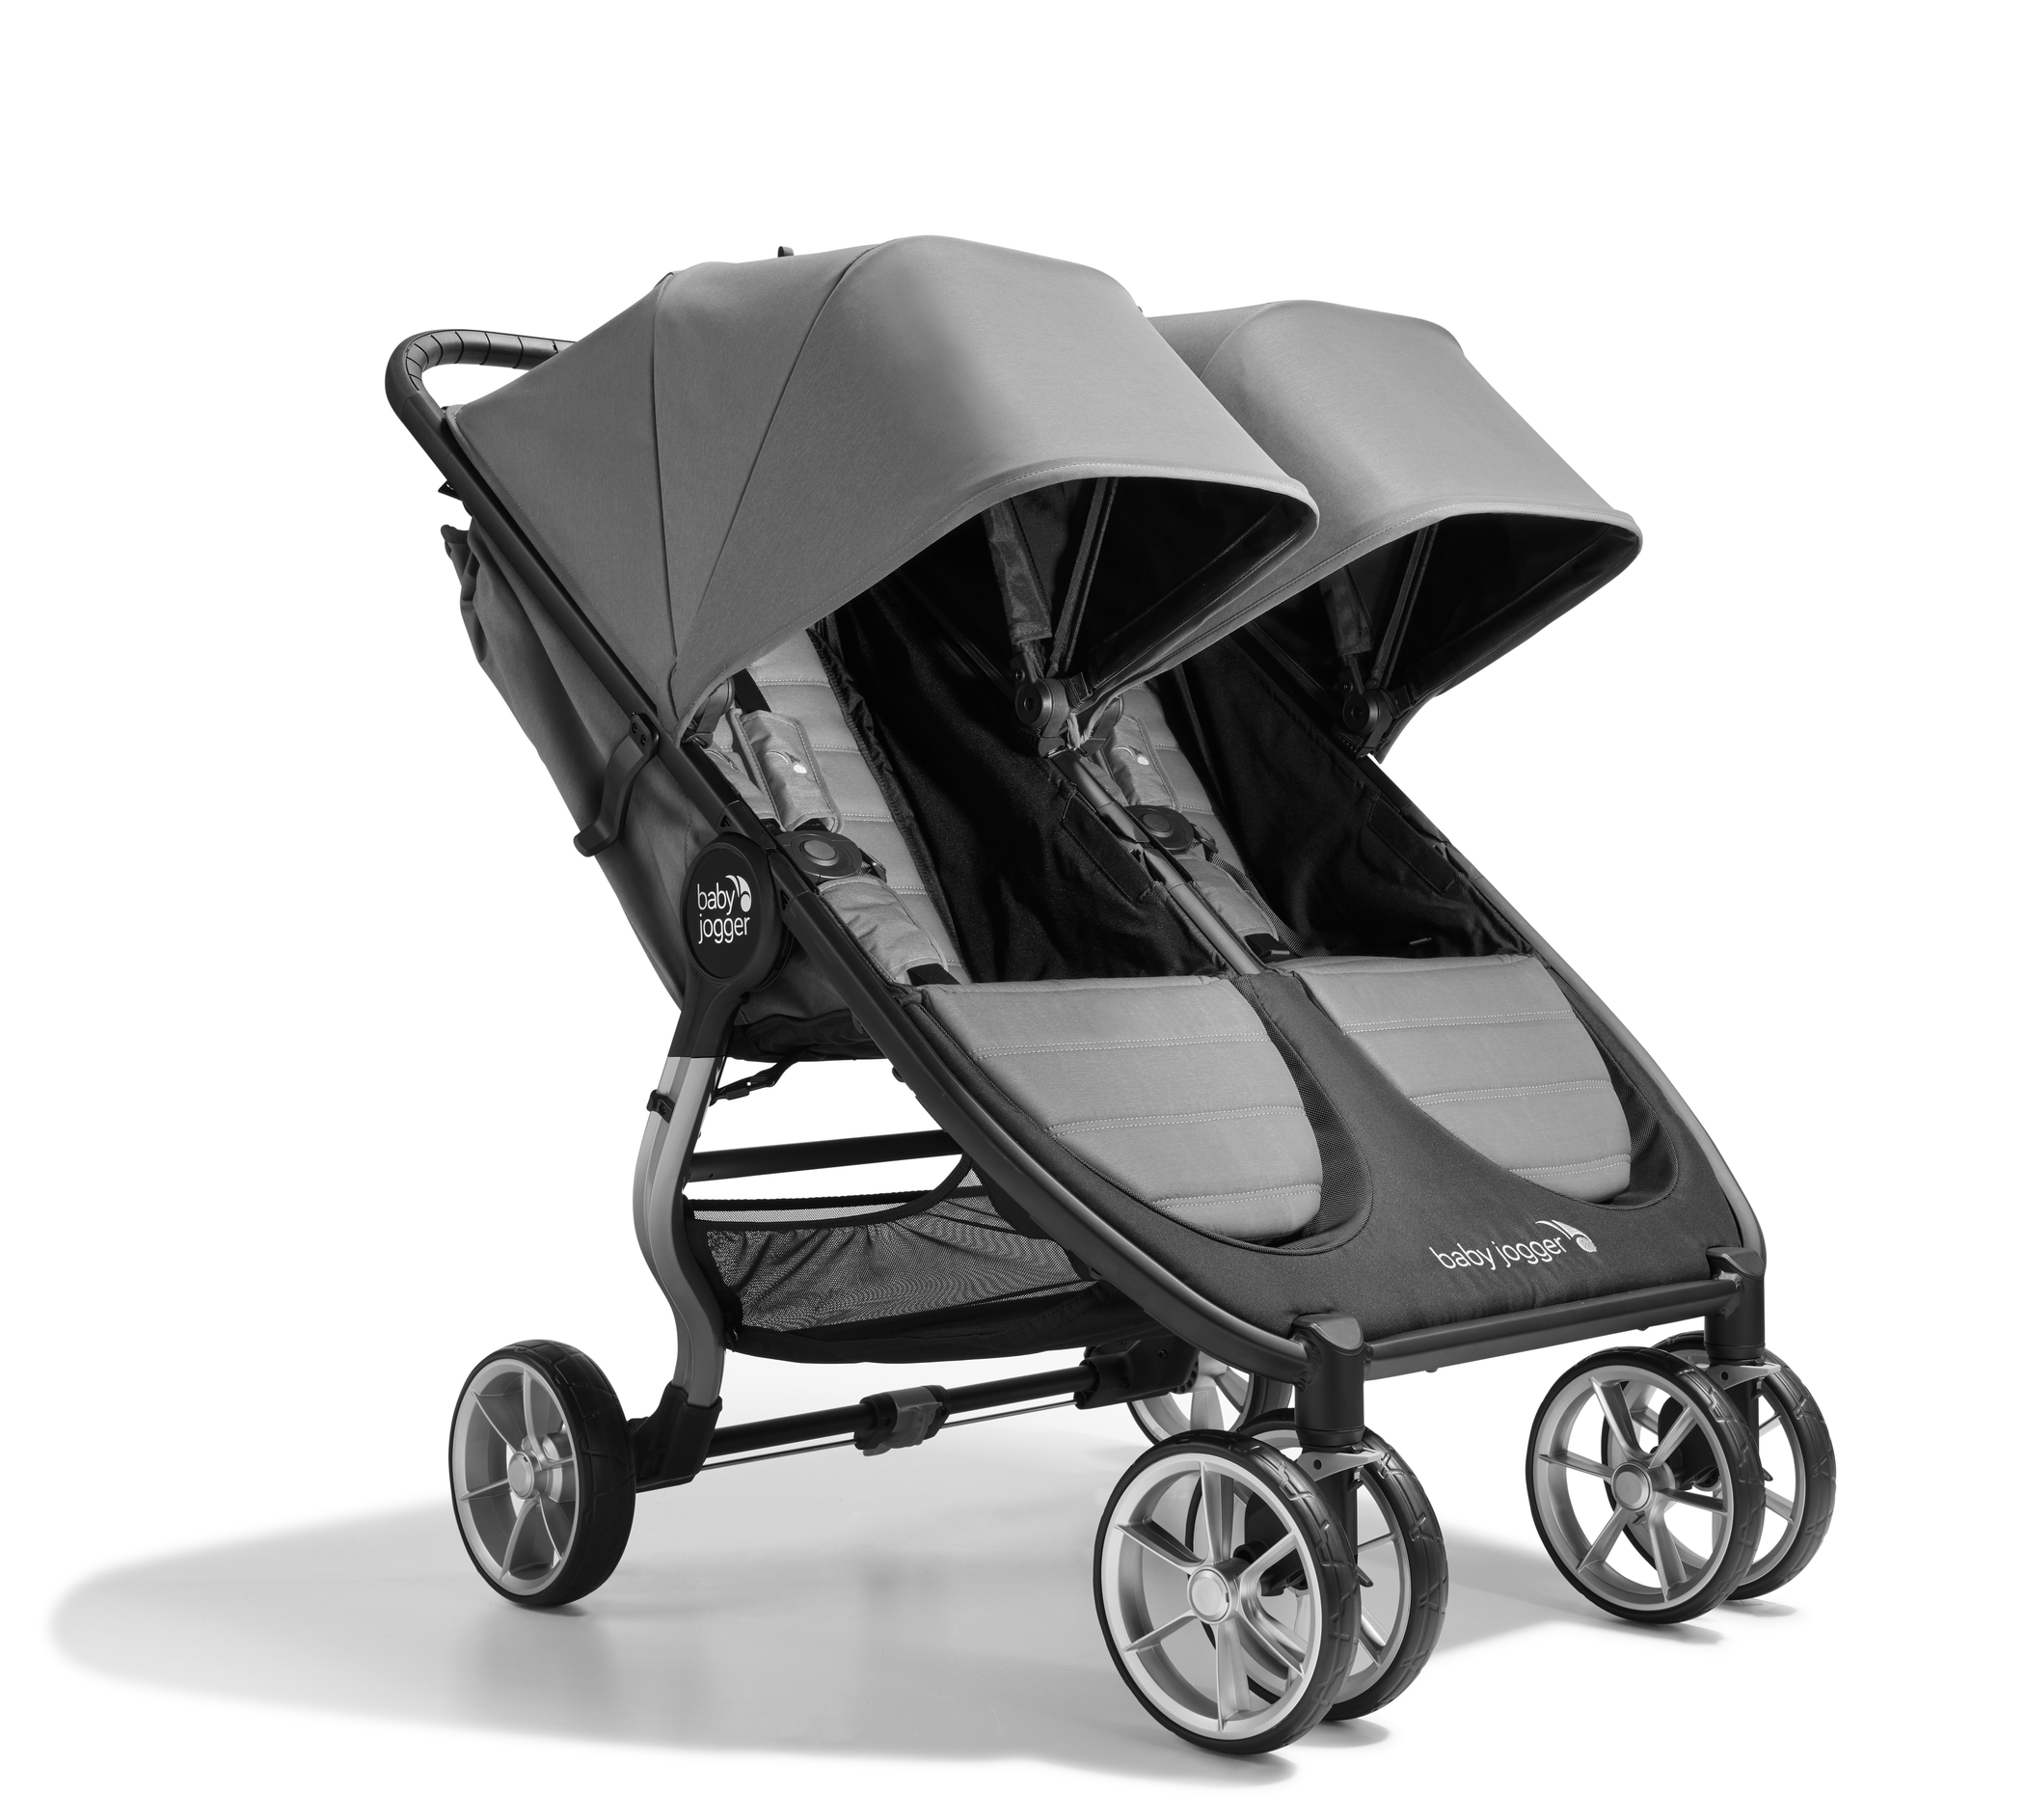 Baby Jogger City Mini 2 Double Stroller Review: compact and high-quality